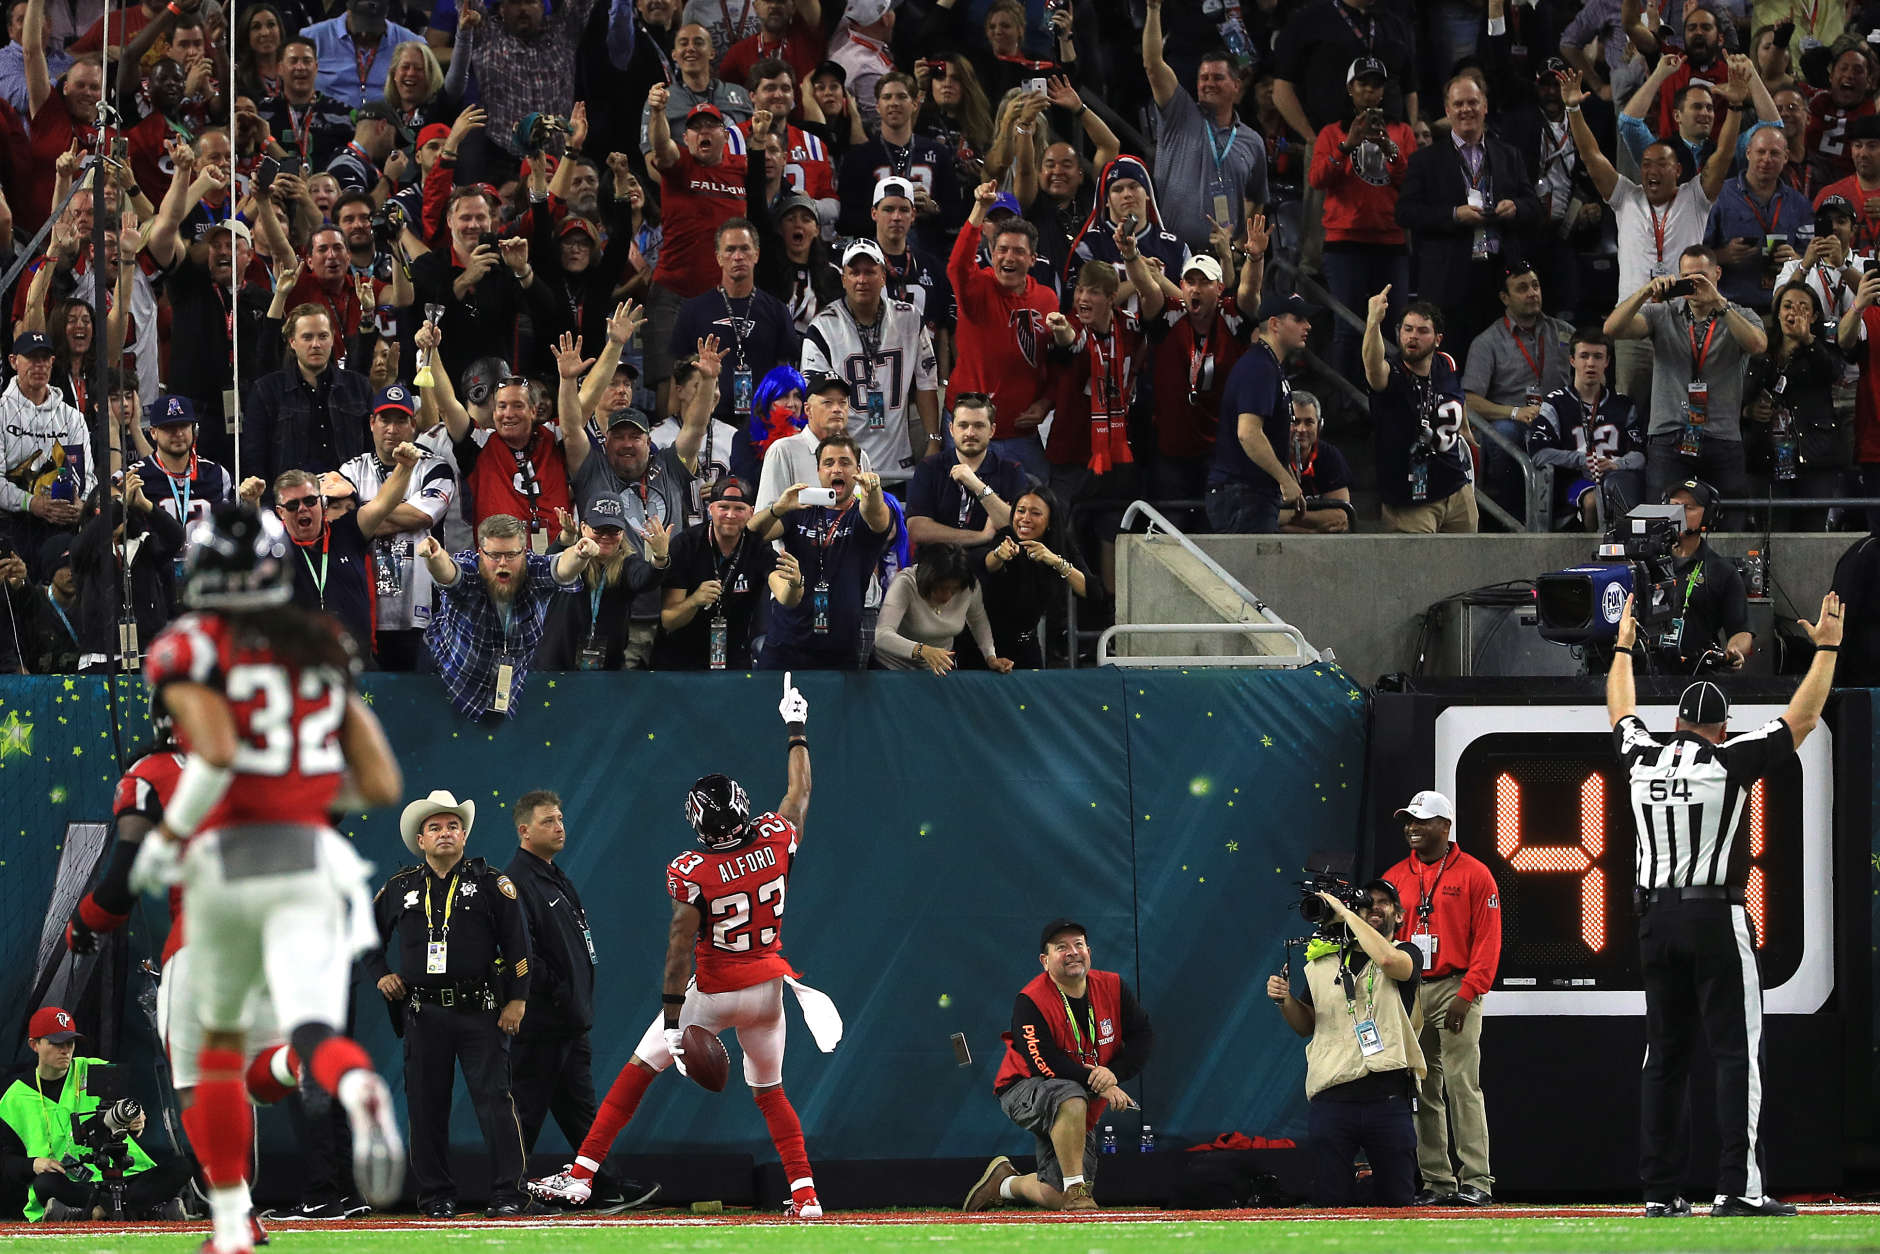 HOUSTON, TX - FEBRUARY 05: Robert Alford #23 of the Atlanta Falcons celebrates his interception touchdown during the second quarter against the New England Patriots during Super Bowl 51 at NRG Stadium on February 5, 2017 in Houston, Texas.  (Photo by Mike Ehrmann/Getty Images)